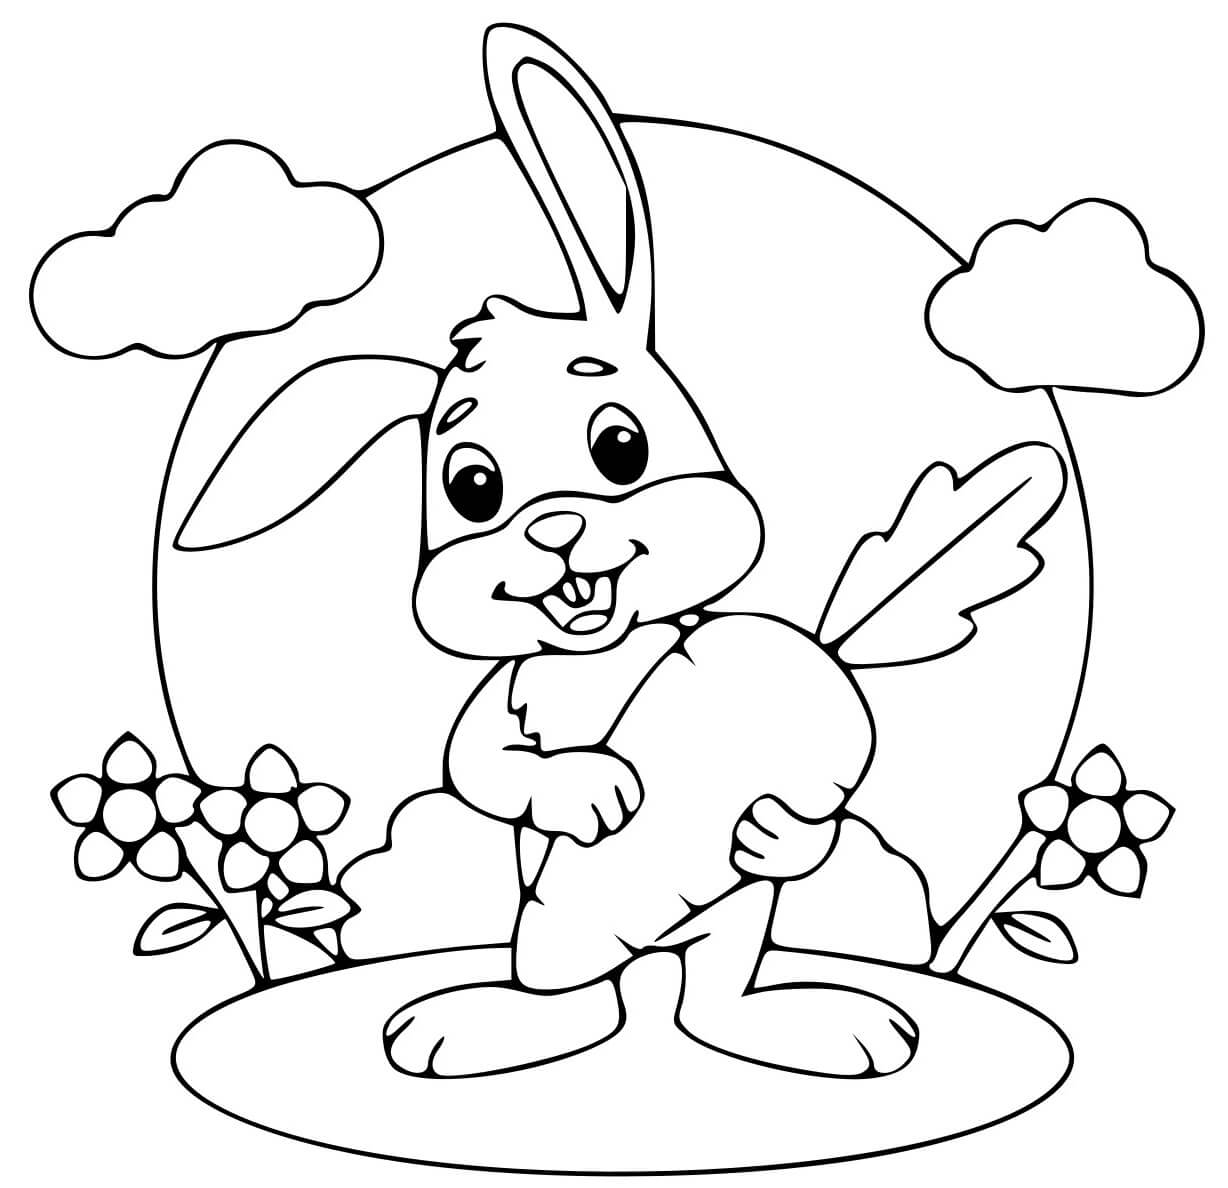 Cute Rabbit Holding Carrot Coloring Page